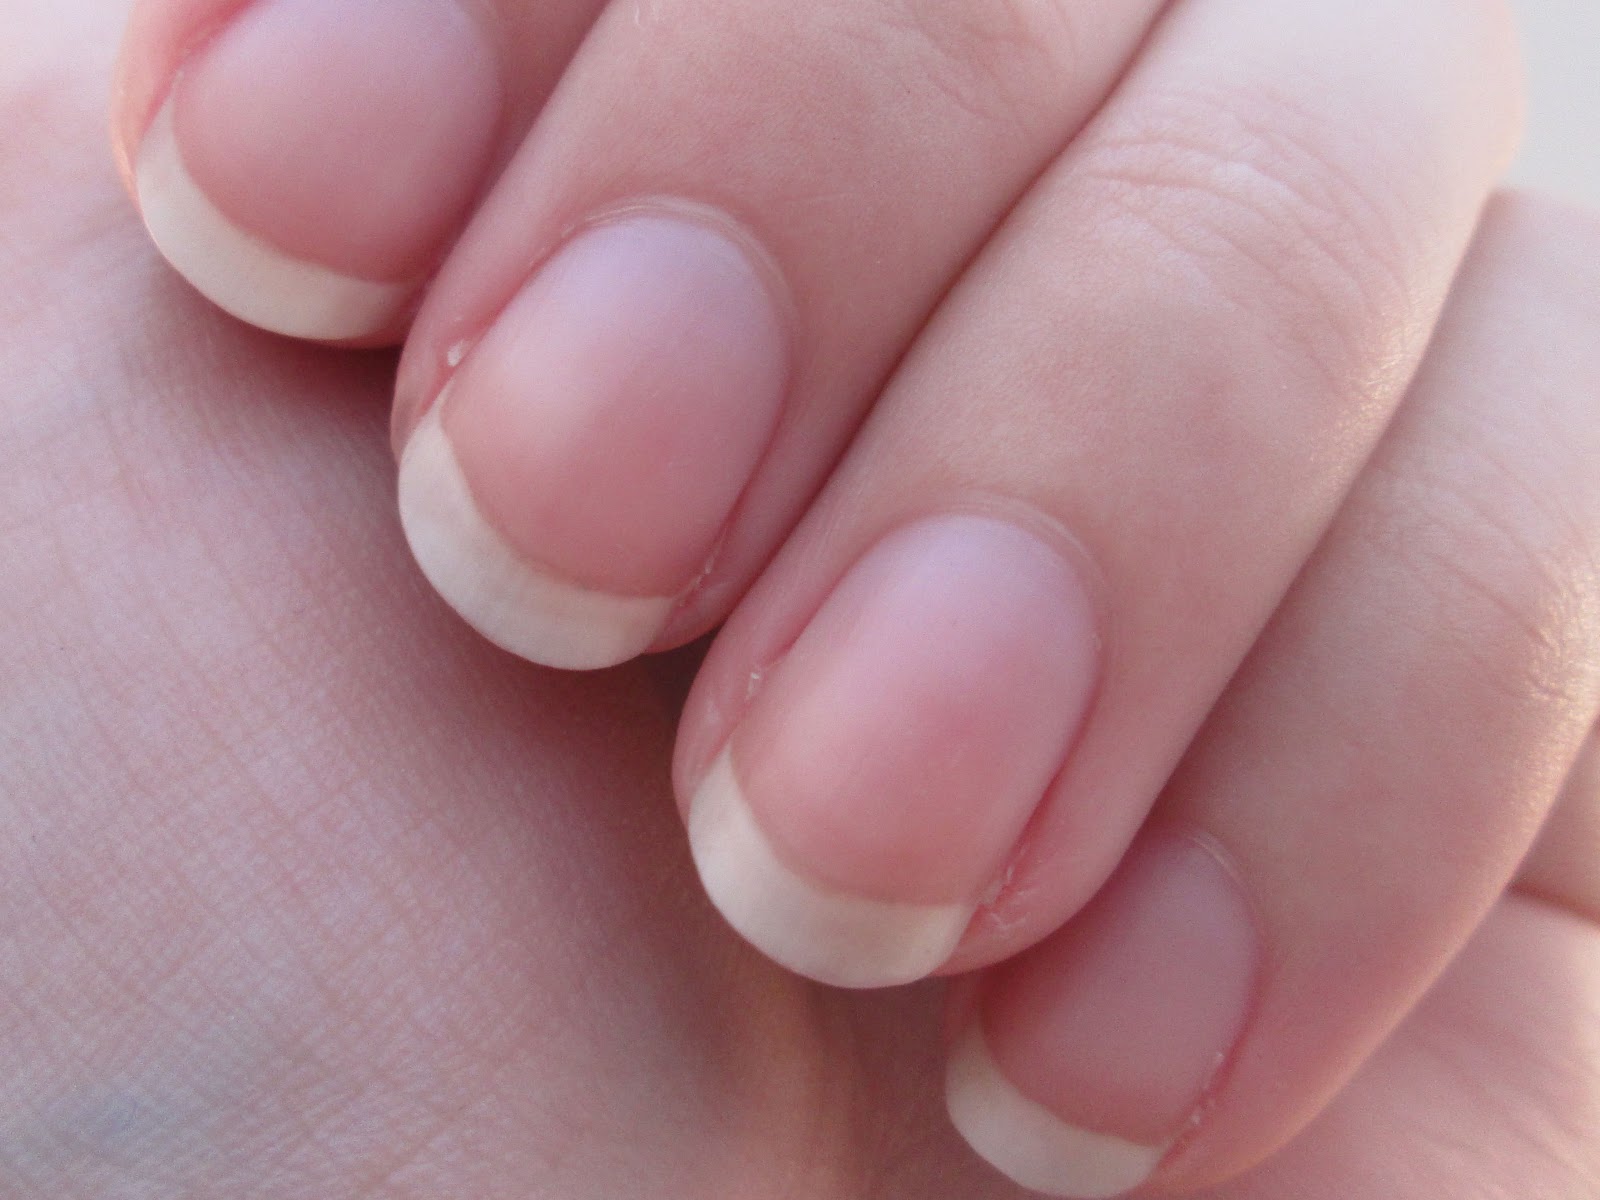 What Could No Moons on Fingernails Mean? | New Health Advisor